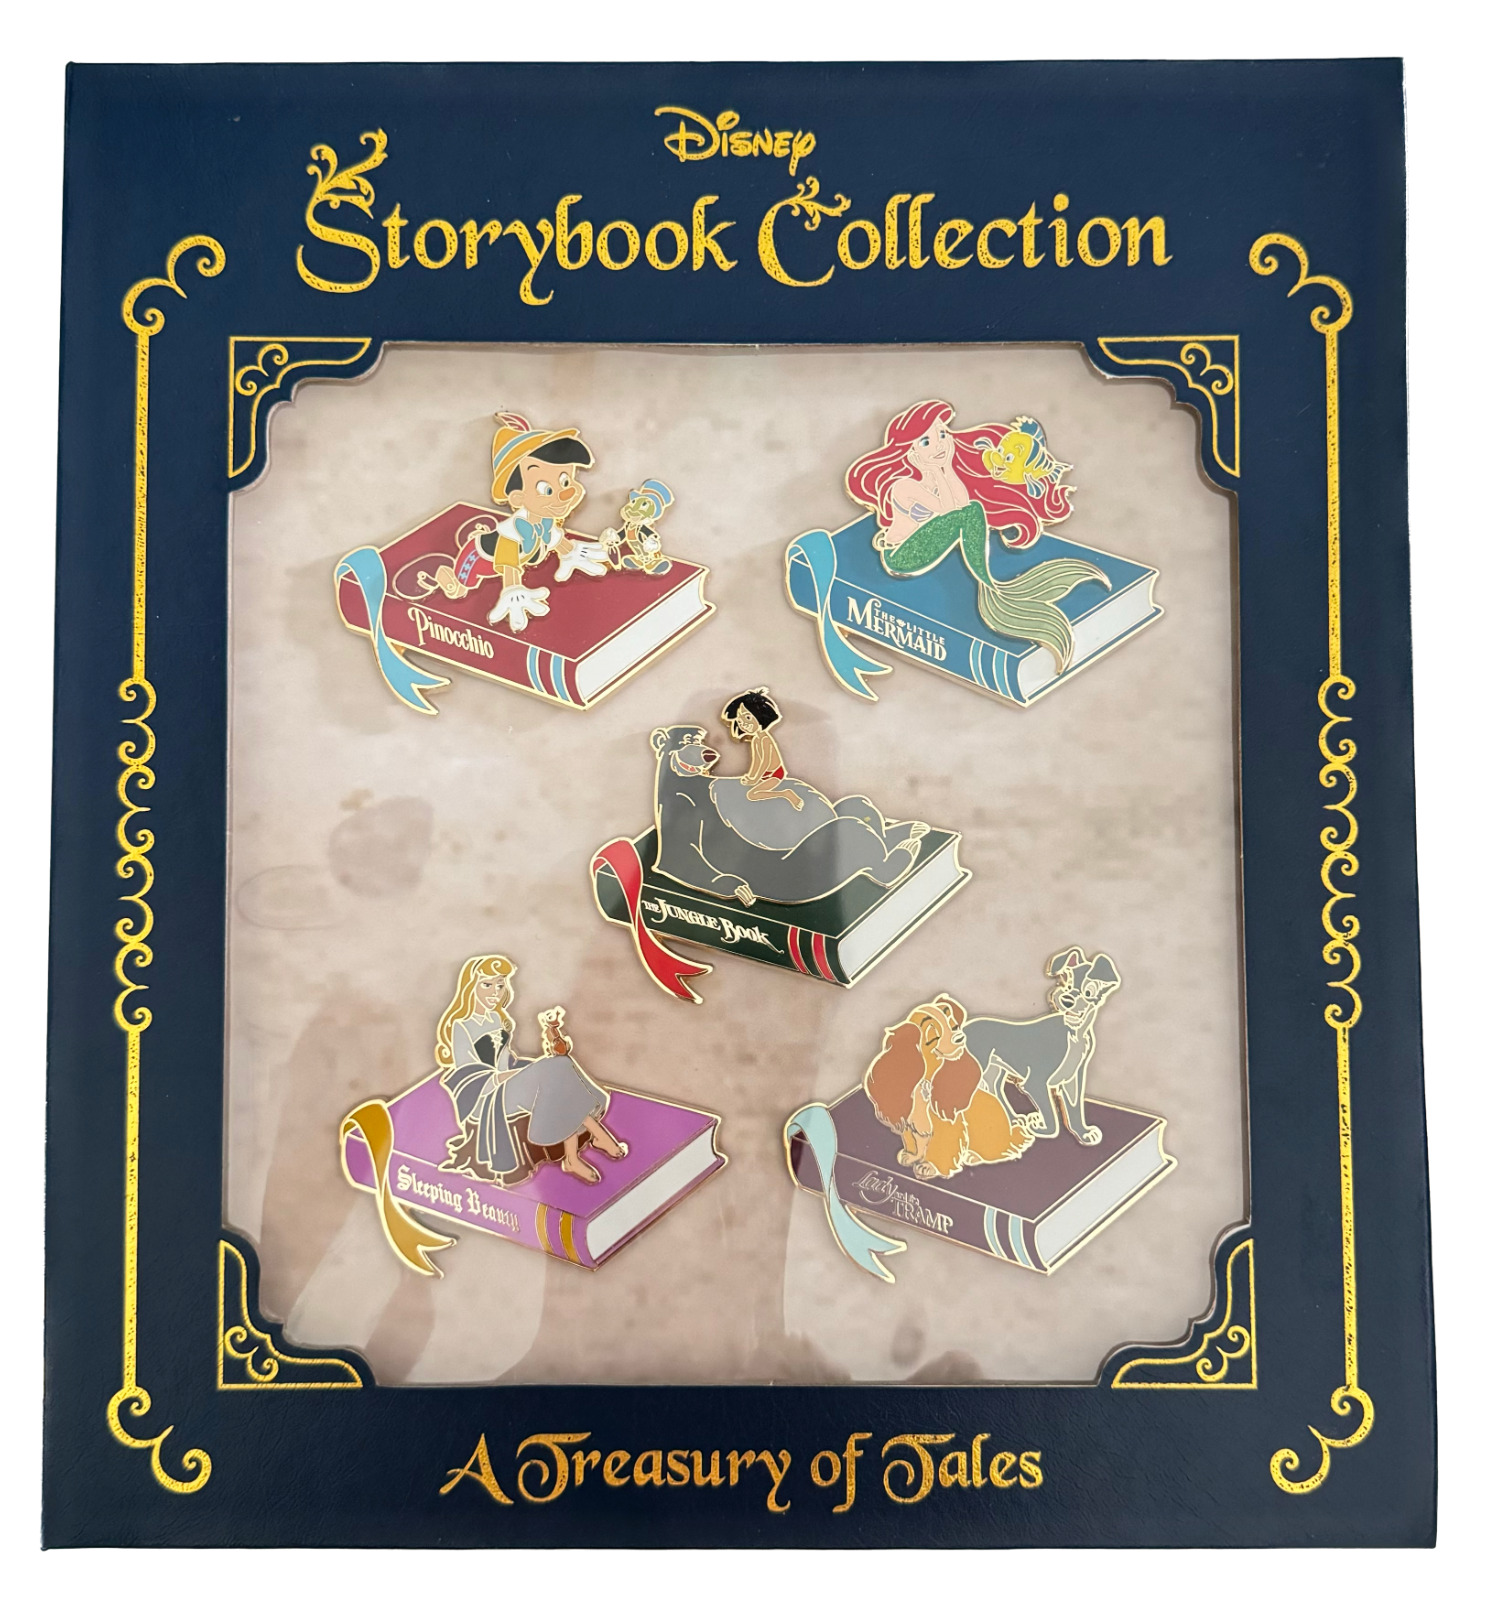 2017 D23 Expo WDI Storybook Collection A Treasury of Tales Set of 5 Pins LE 250